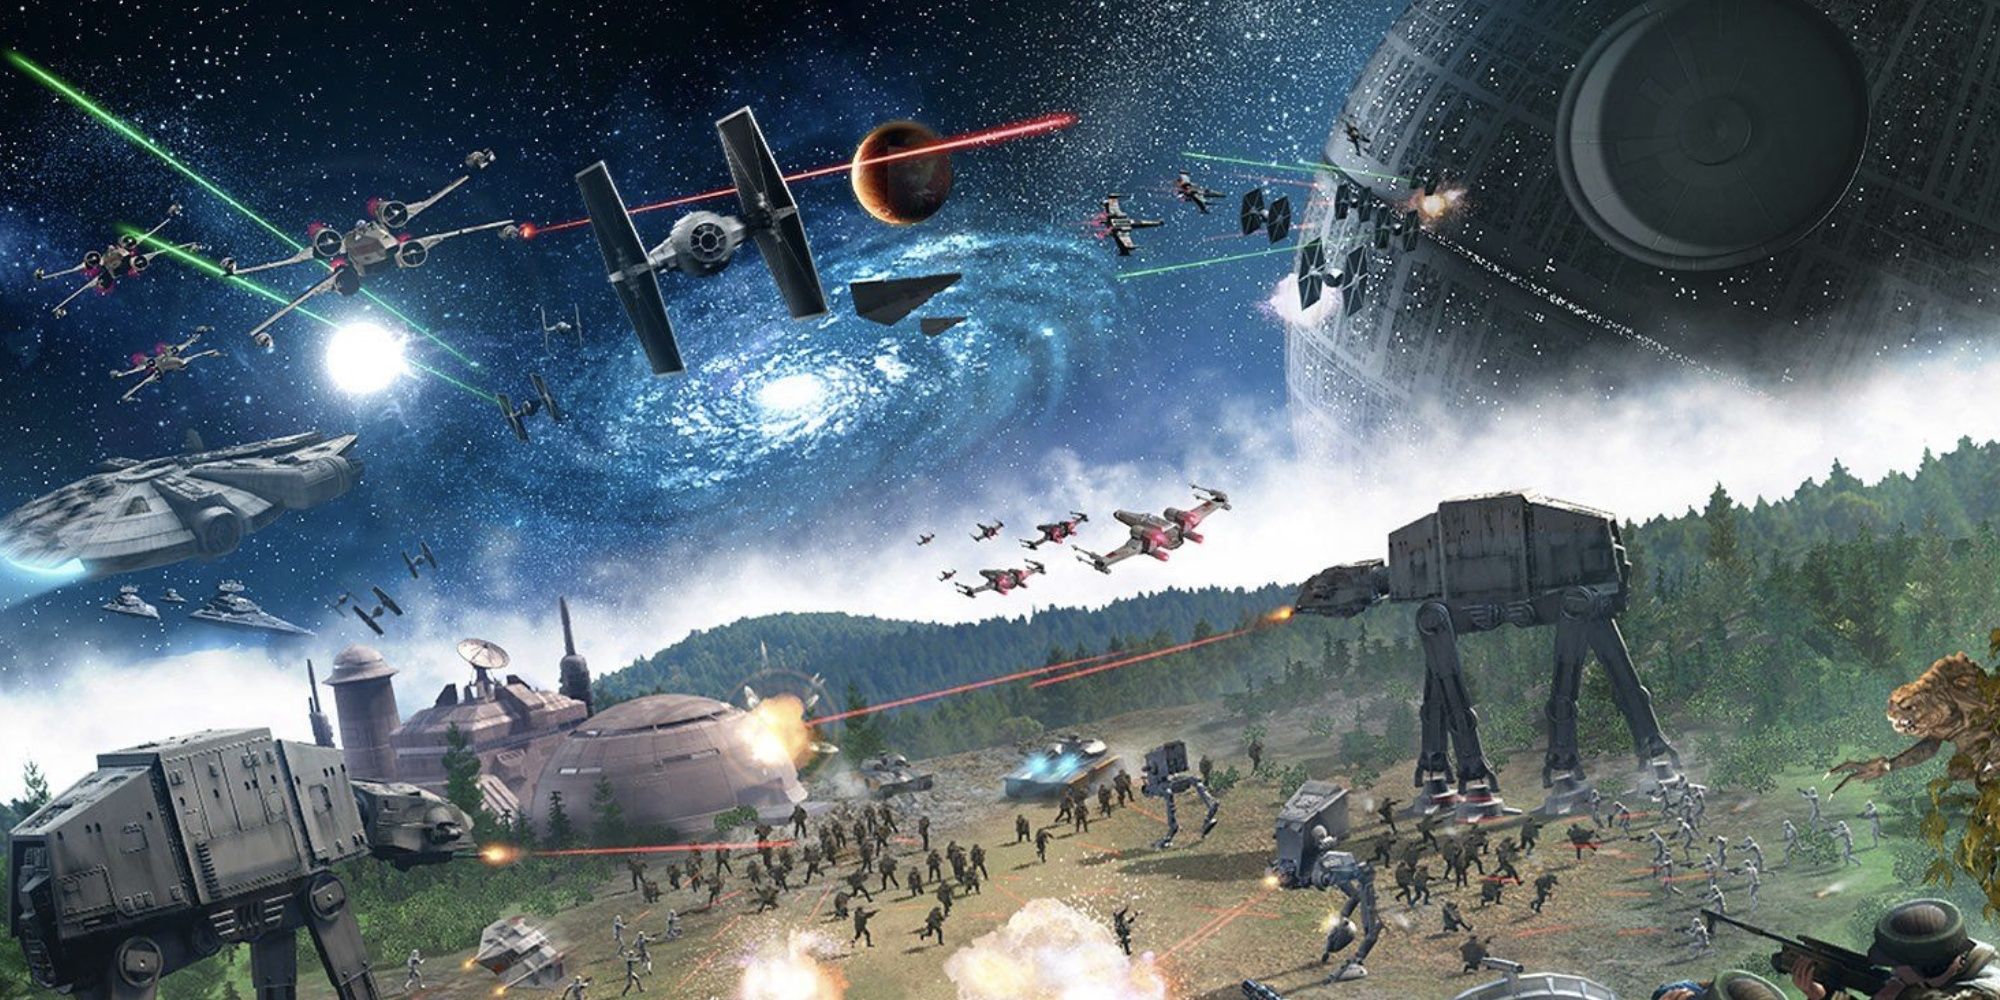 A battle rages over an unknown planet, between the Empire and the Rebel forces